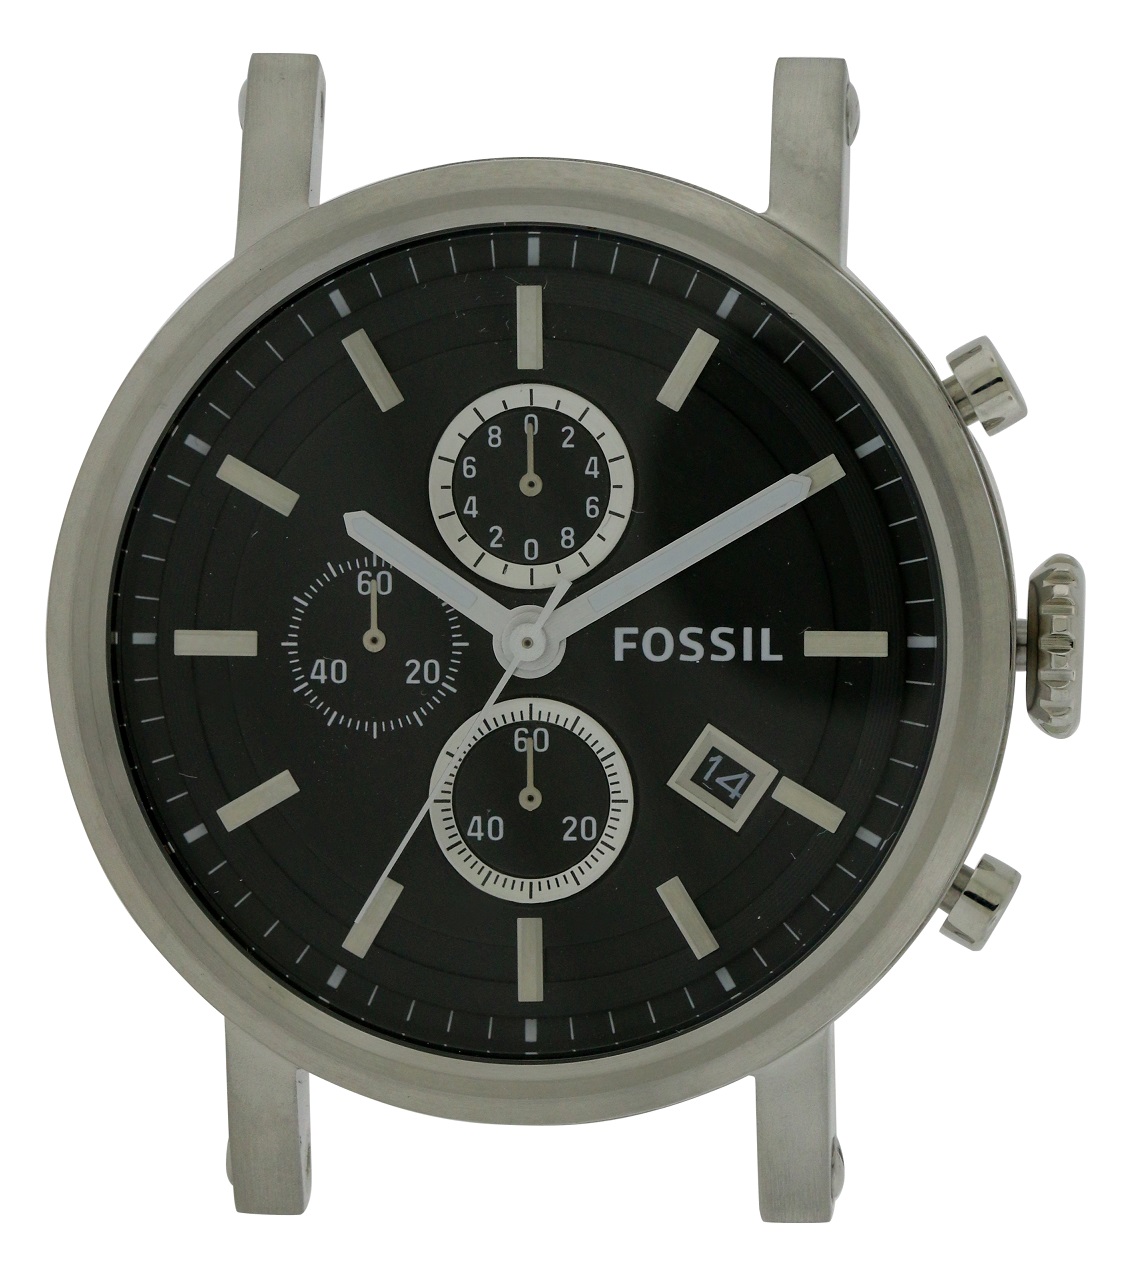 Fossil Stainless Steel Chronograph Mens Watch Case C221003